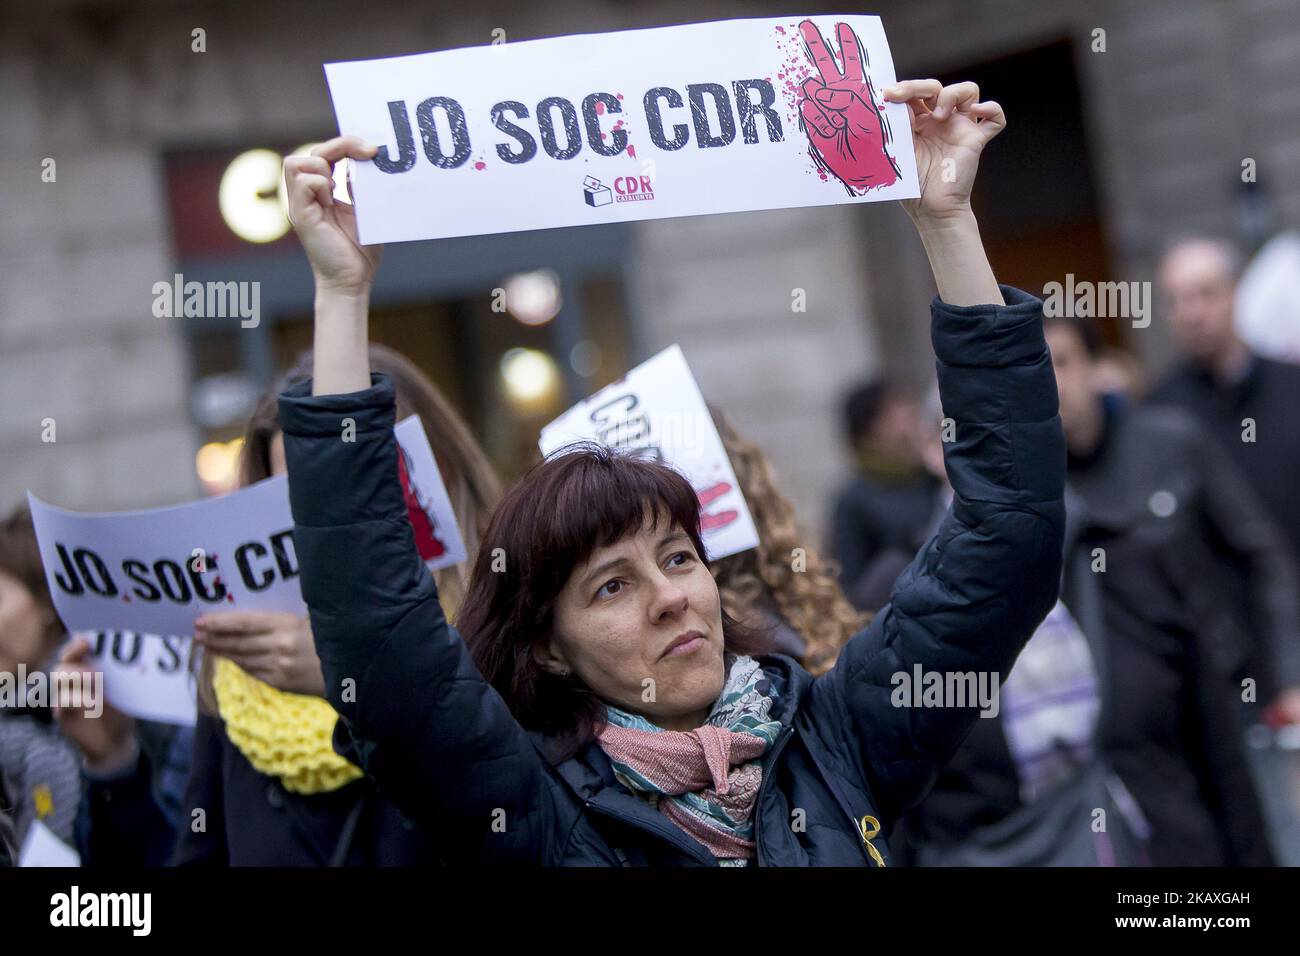 Thousands of protesters support the pro-independence activist arrested by Guardia Civil (spanish military police) and Mossos d'Esquadra (Catalan autonomous police) linked to the CDR (Comitès de Defensa de la República - Republlic's Defenders Comitee), holding banners with the text 'Jo sóc CDR' (I'm CDR) in Catalonia in Barcelona, Catalonia, Spain on April 10, 2018. (Photo by Miquel Llop/NurPhoto) Stock Photo